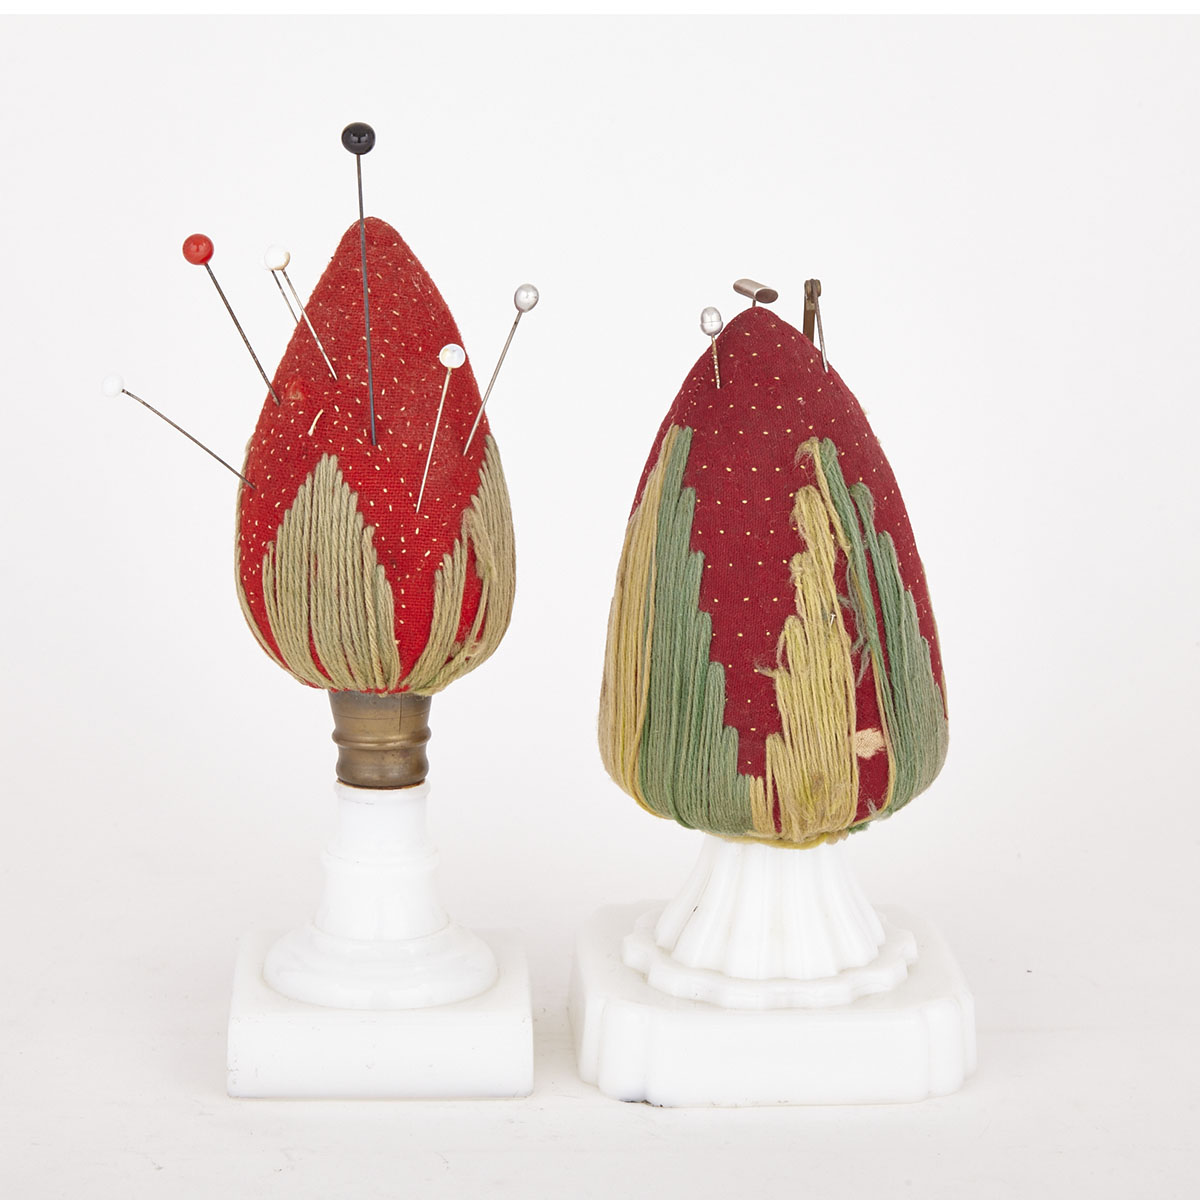 Two Victorian Strawberry Form ‘Make Do’ Pin Cushions, 19th century